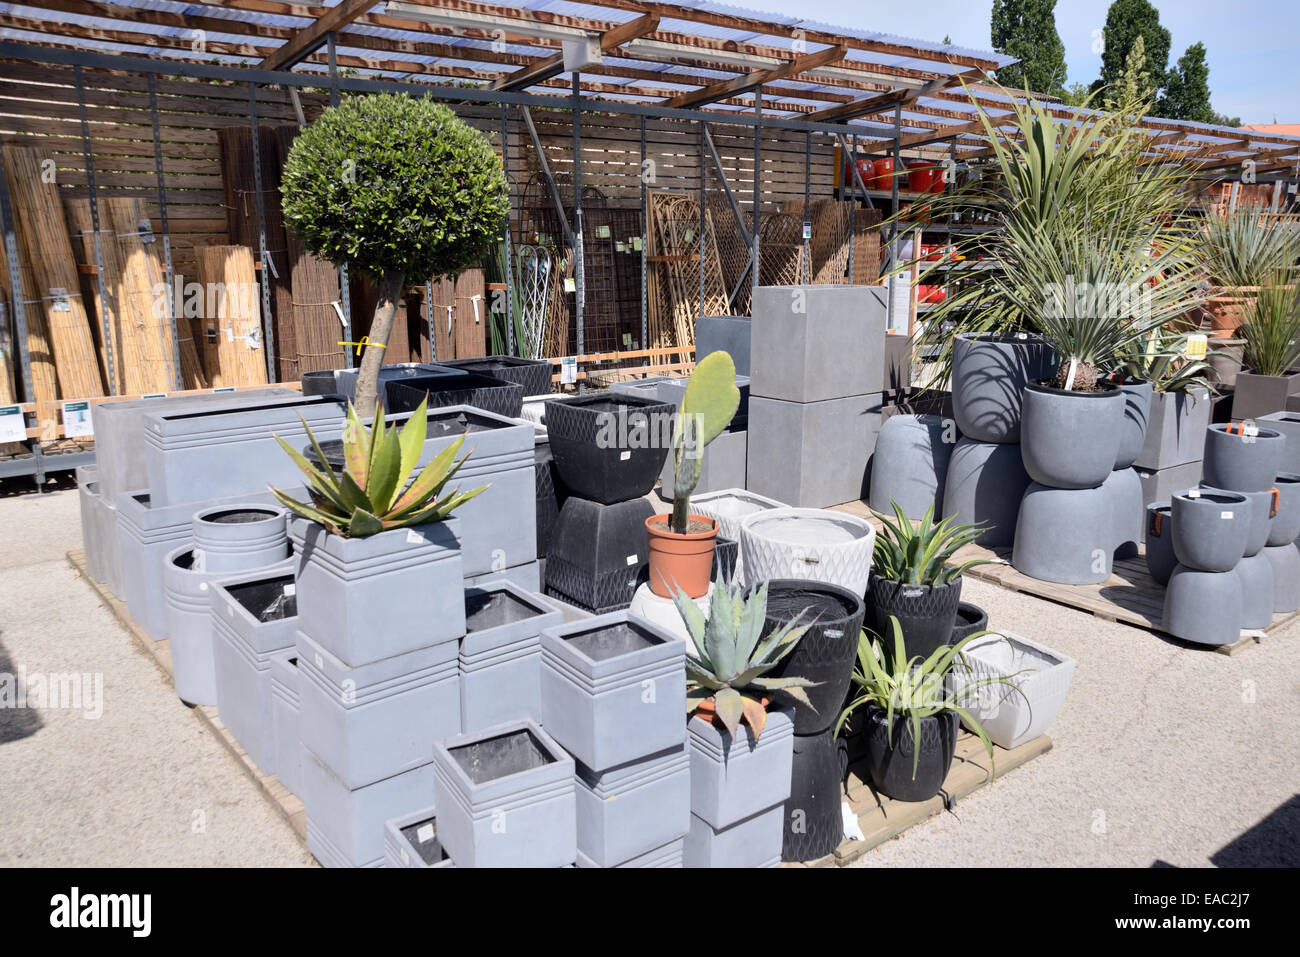 Display of Contemporary or Modern Style Gray or Grey Planters or Plant Pots for Sale in Garden Center or Garden Centre Stock Photo